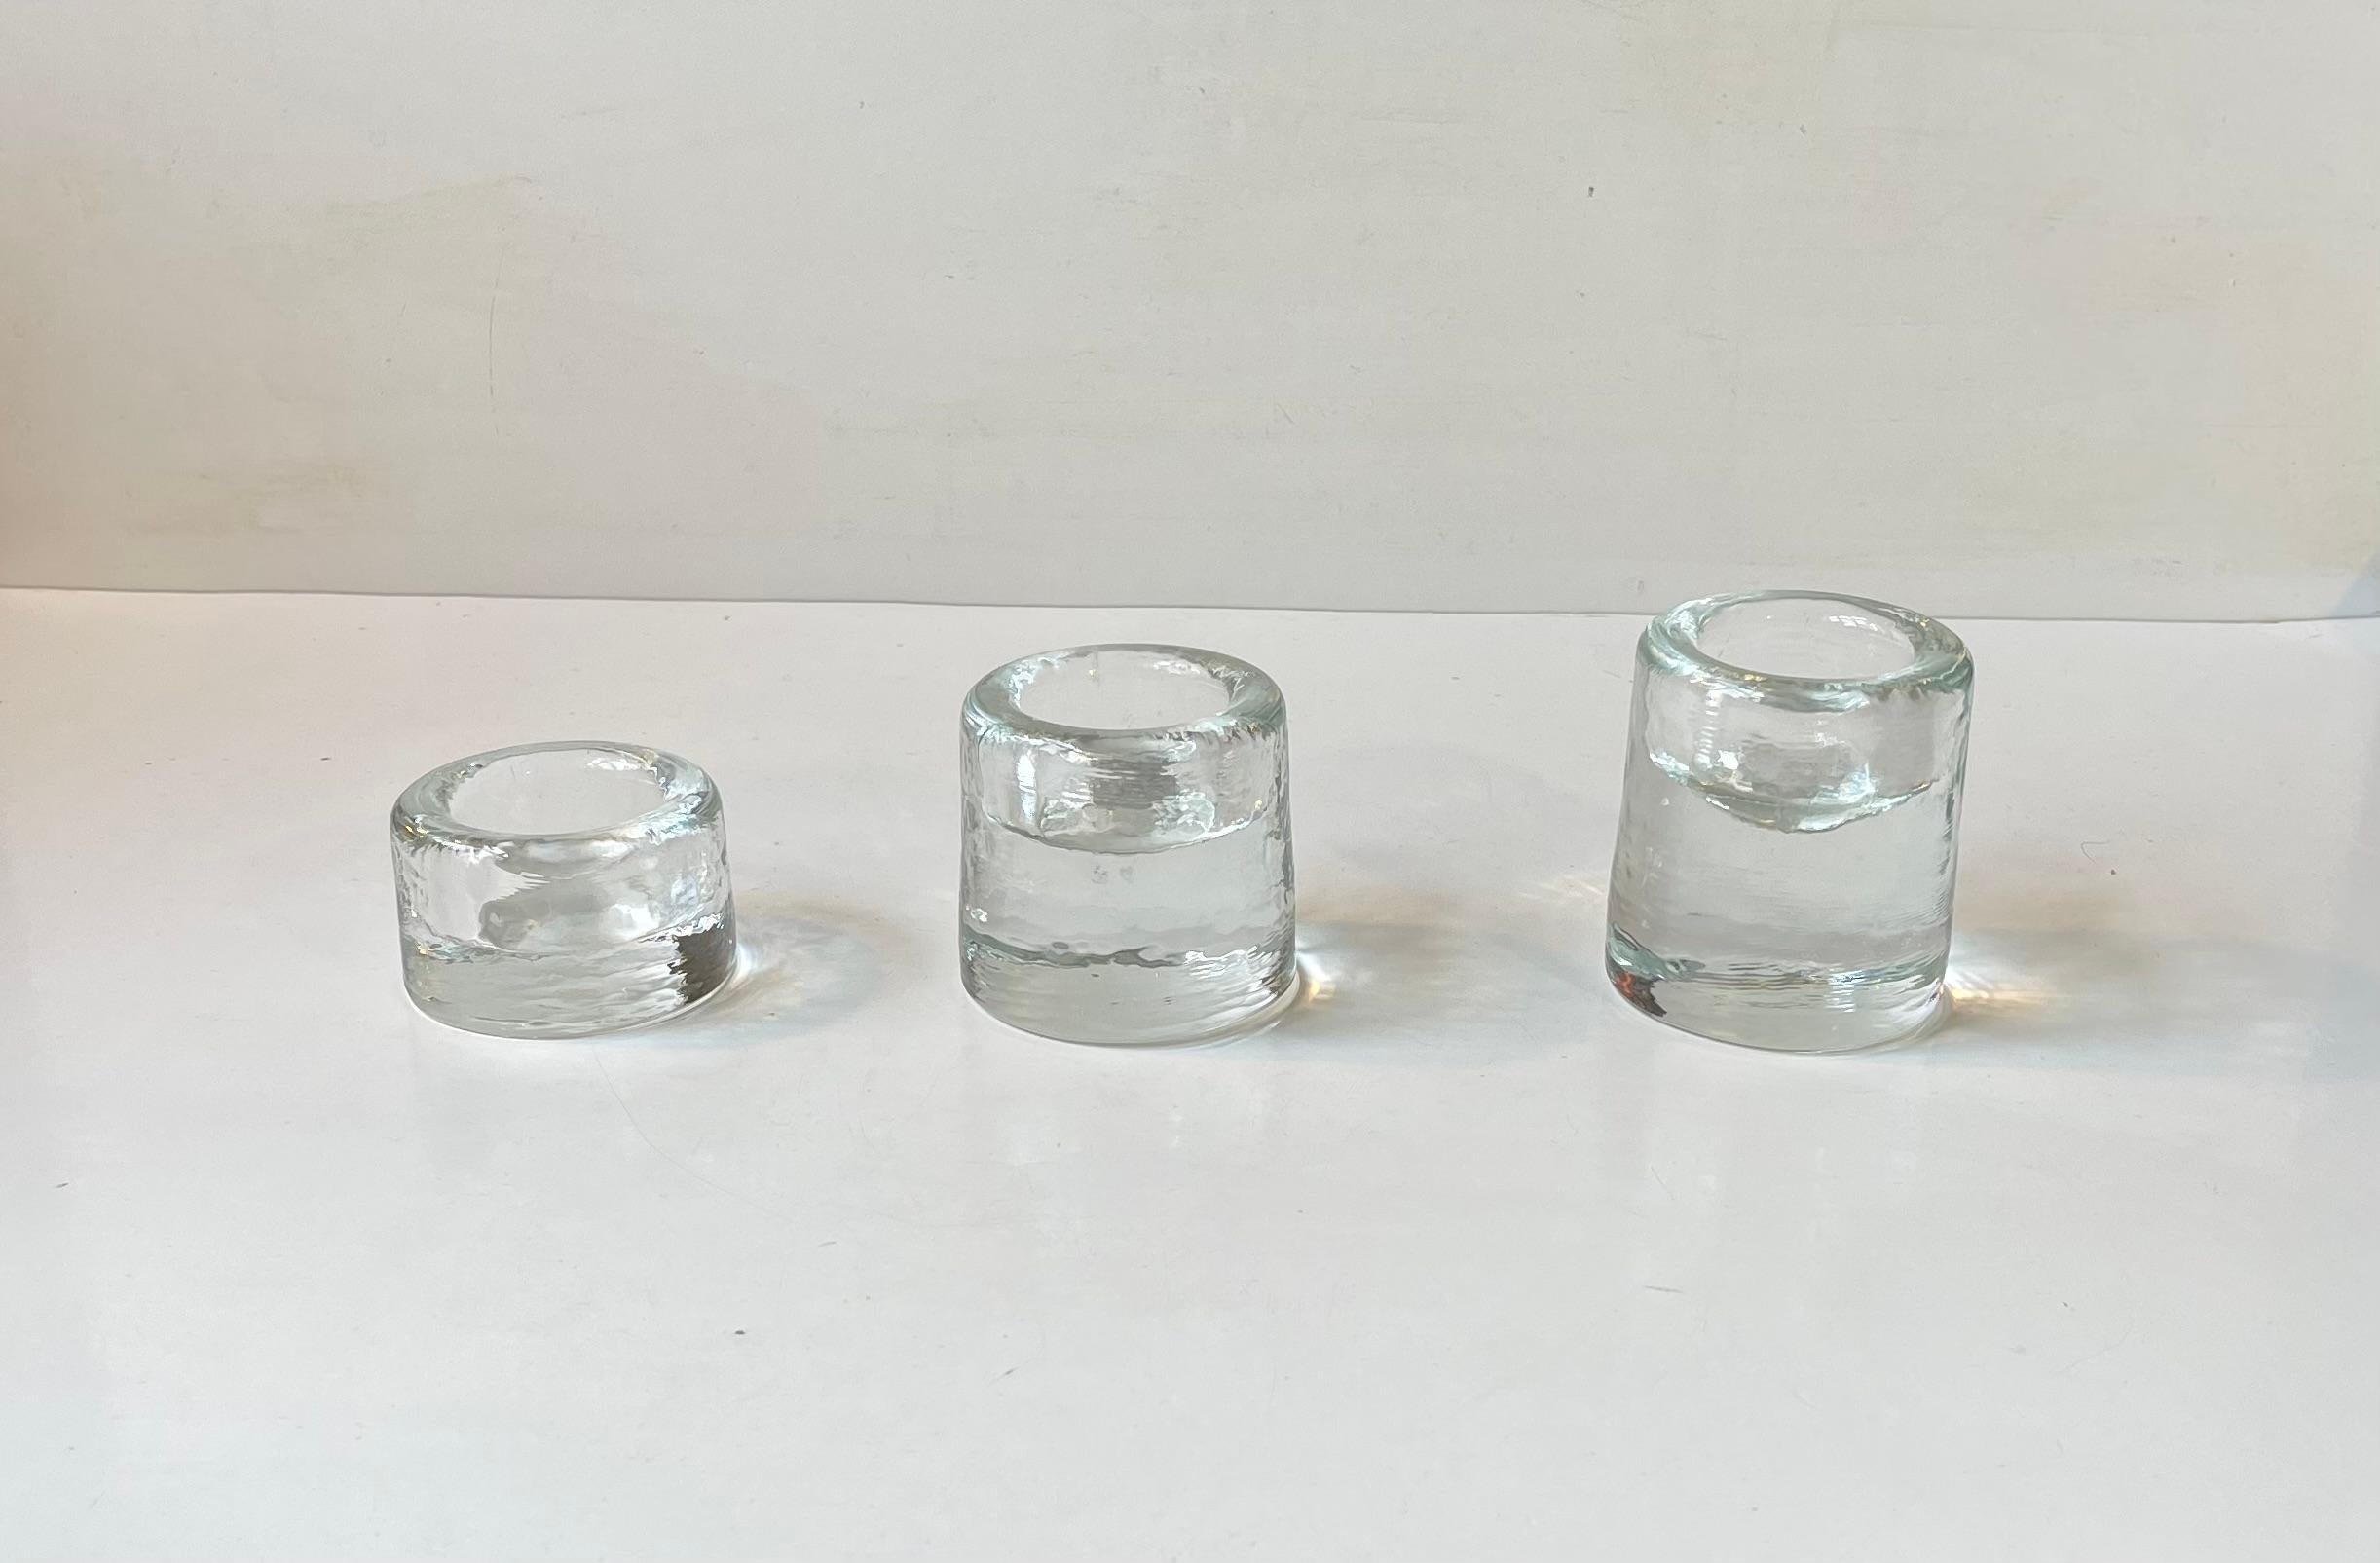 Scandinavian Modern Chimney Ice Glass Candleholders In Good Condition For Sale In Esbjerg, DK